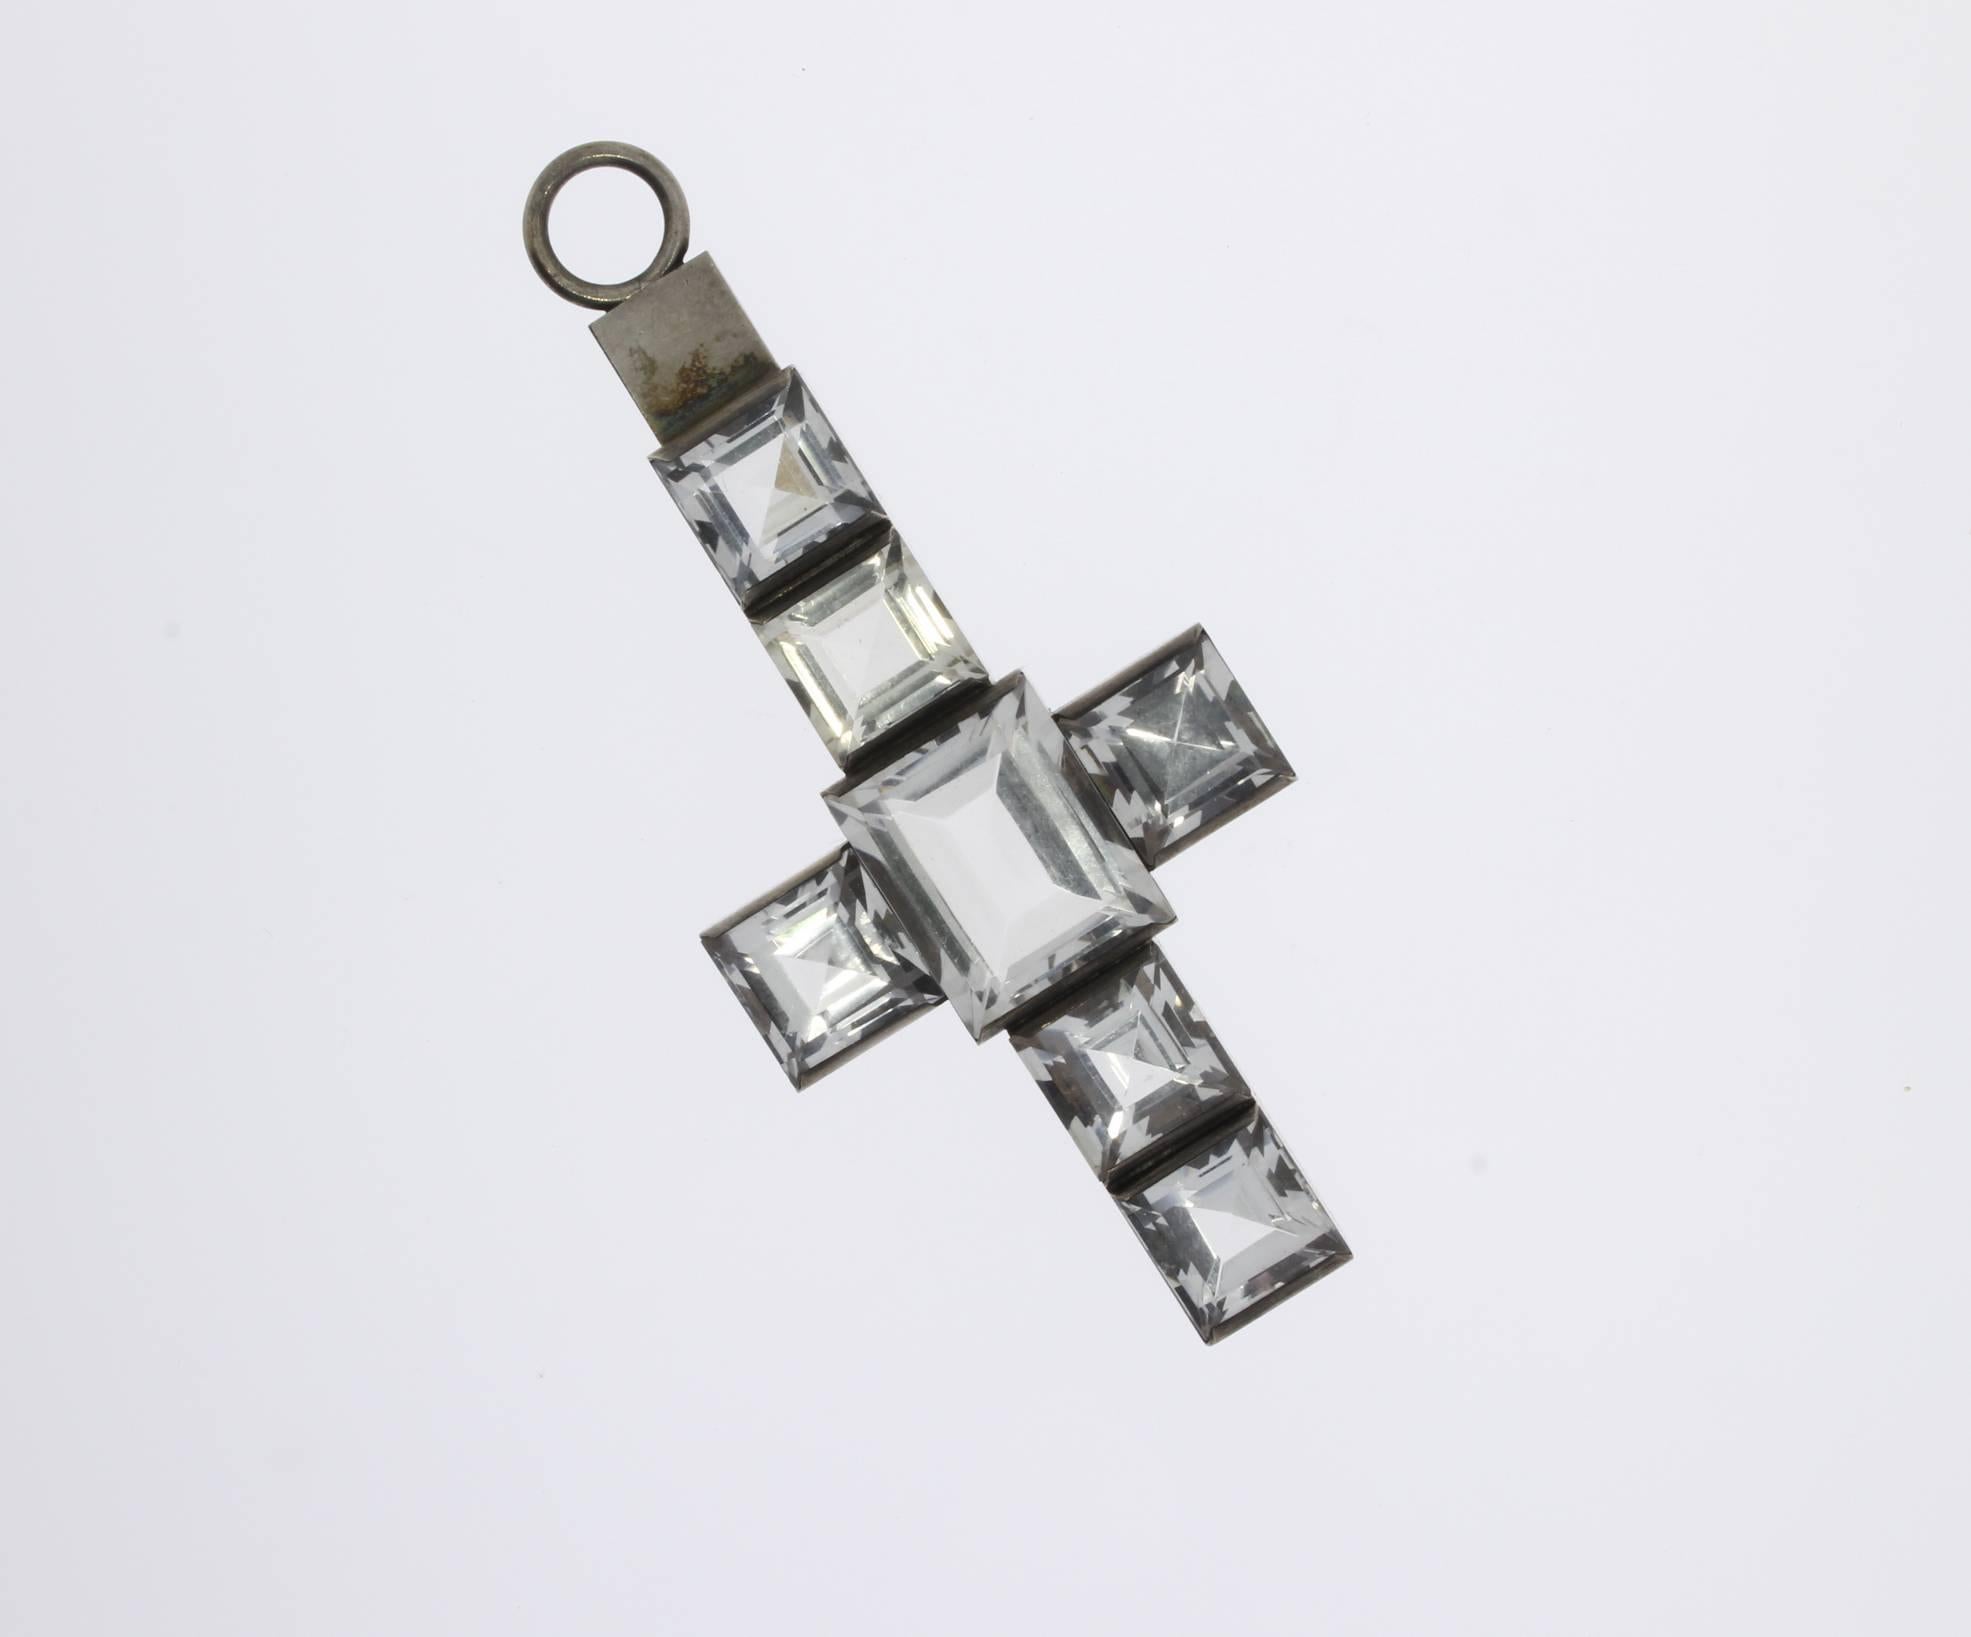 1940's cross pendant with long chain. Rock crystal in silver by Wiwen Nilsson, Sweden. Hallmarked and signed on the side: Wiwen Nilsson, SWEDEN, STERLING and further several mark. Total weight with chain: 70,1 g.
Pendant: 3.35 x 1.54 in ( 8,5 x 3,9